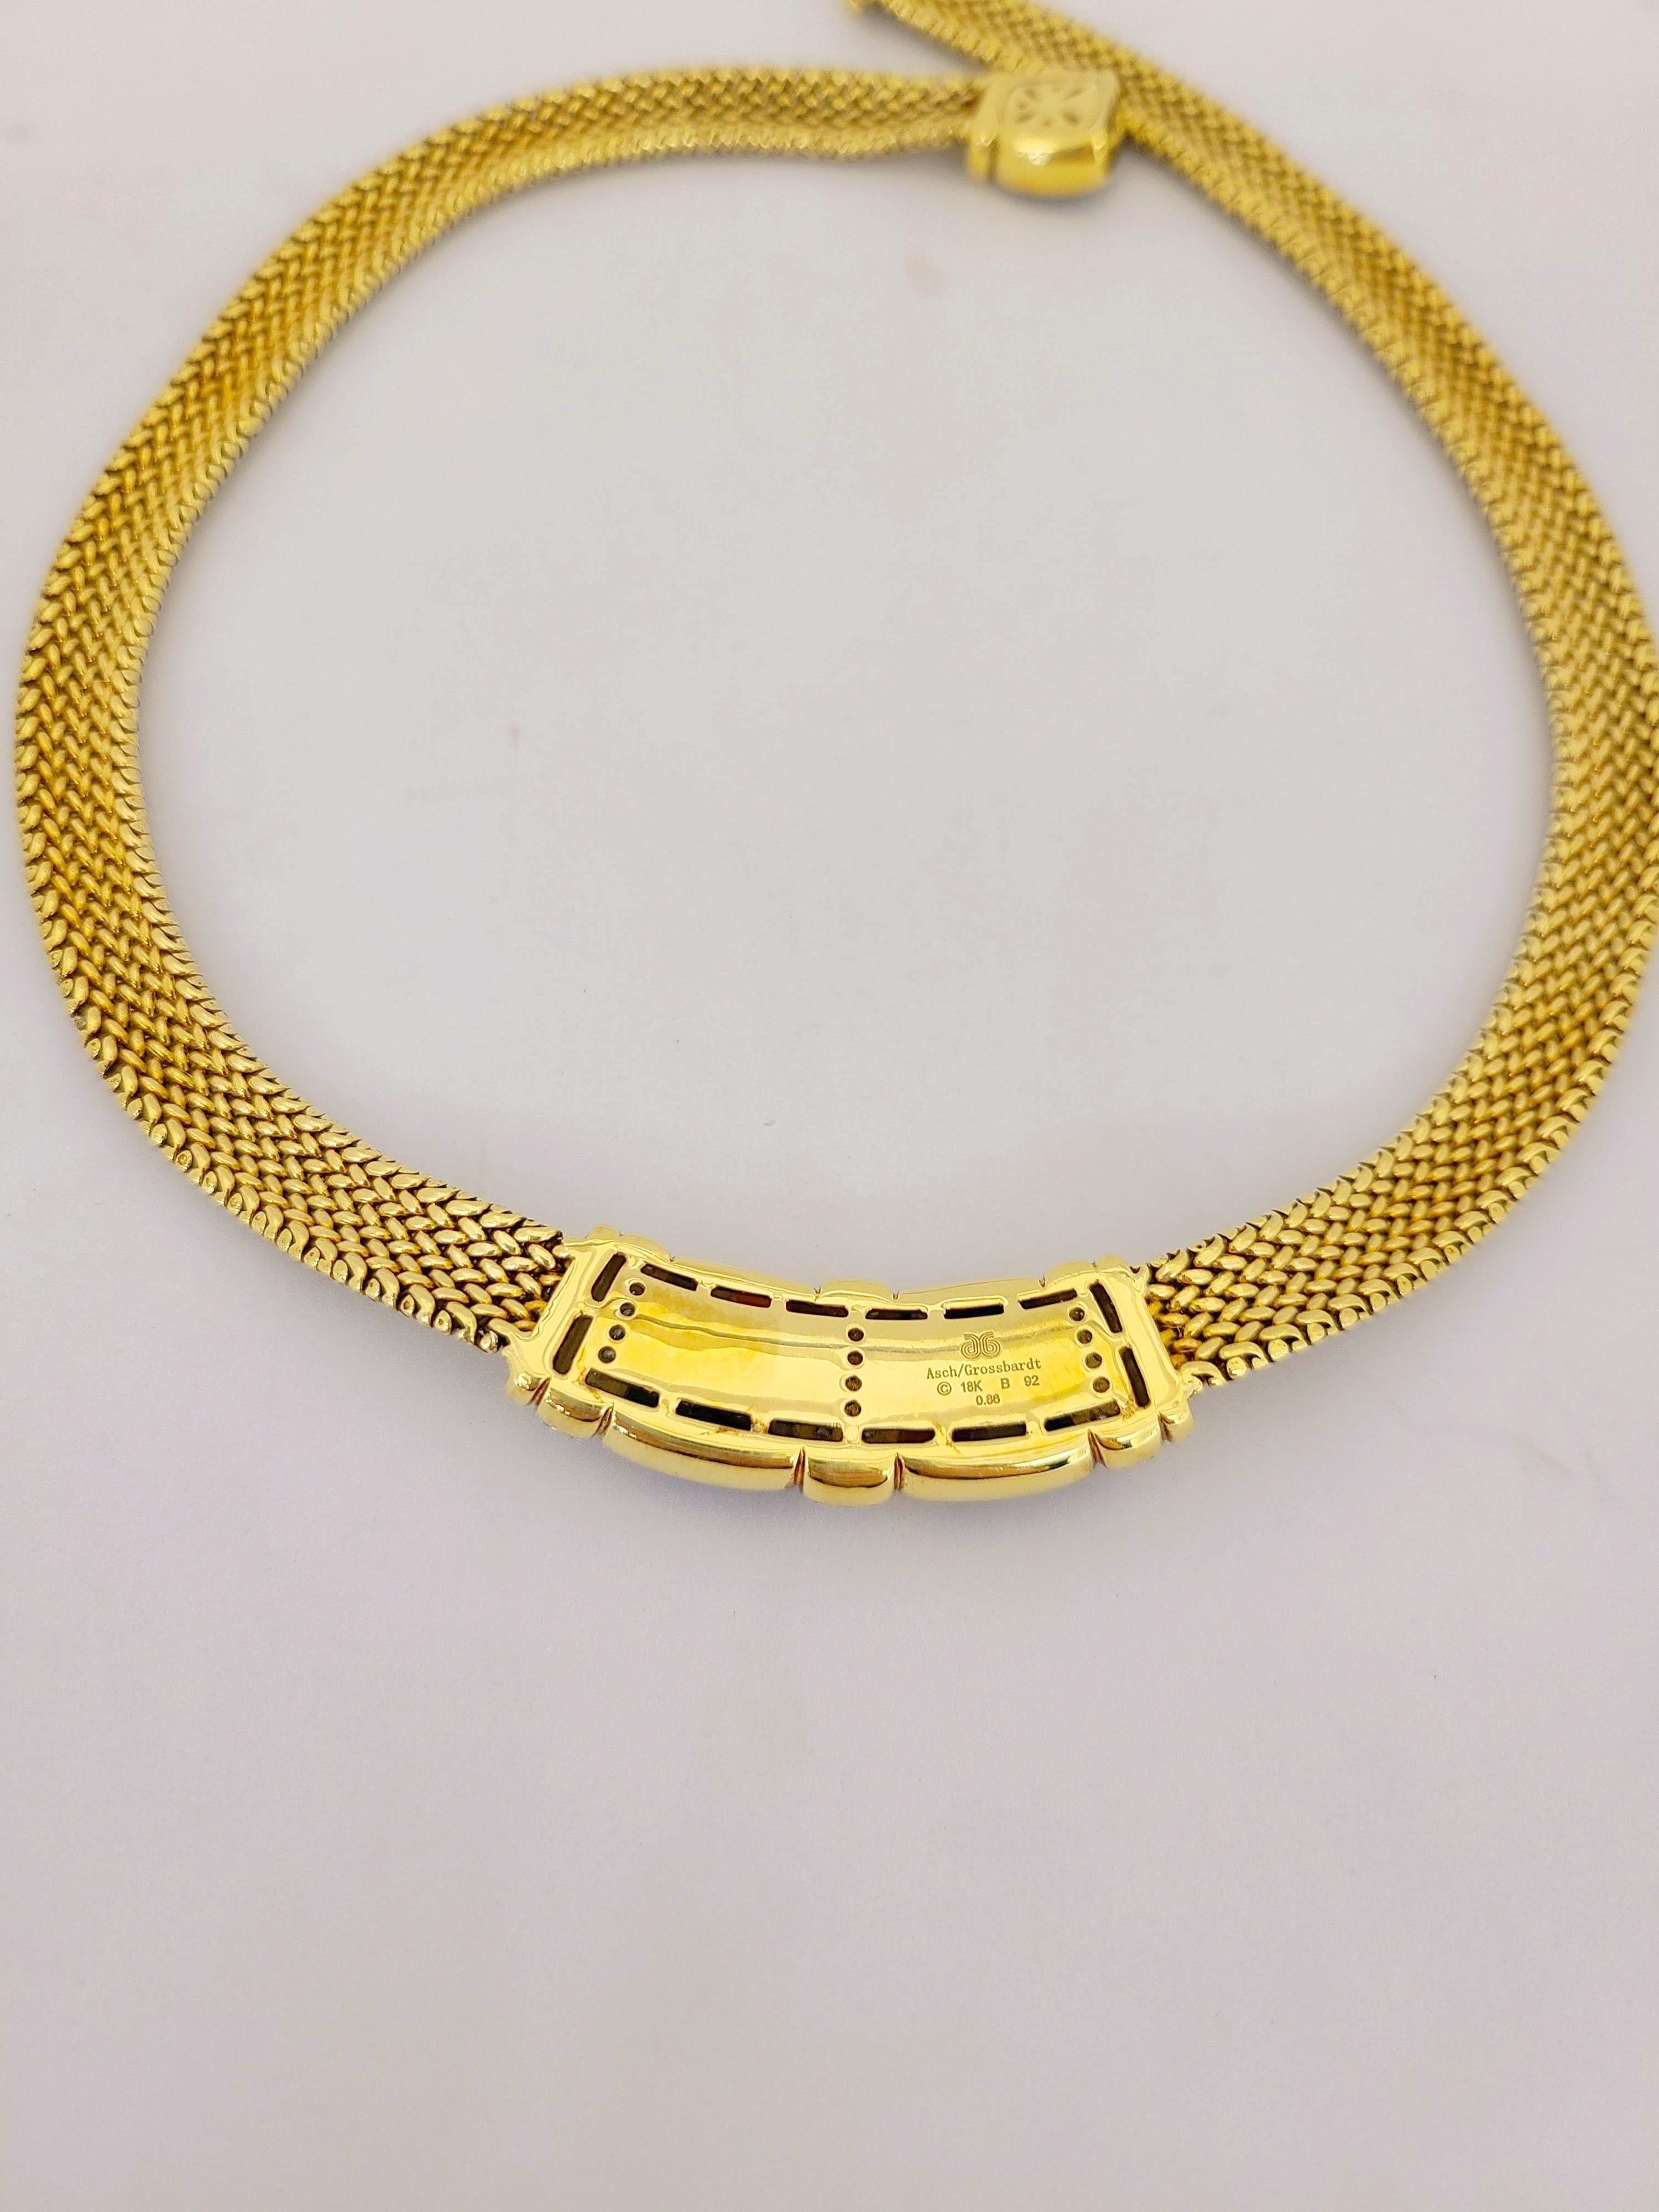 Asch Grosbardt 18 Karat Yellow Gold Necklace with Diamonds and Inlaid Stones For Sale 1